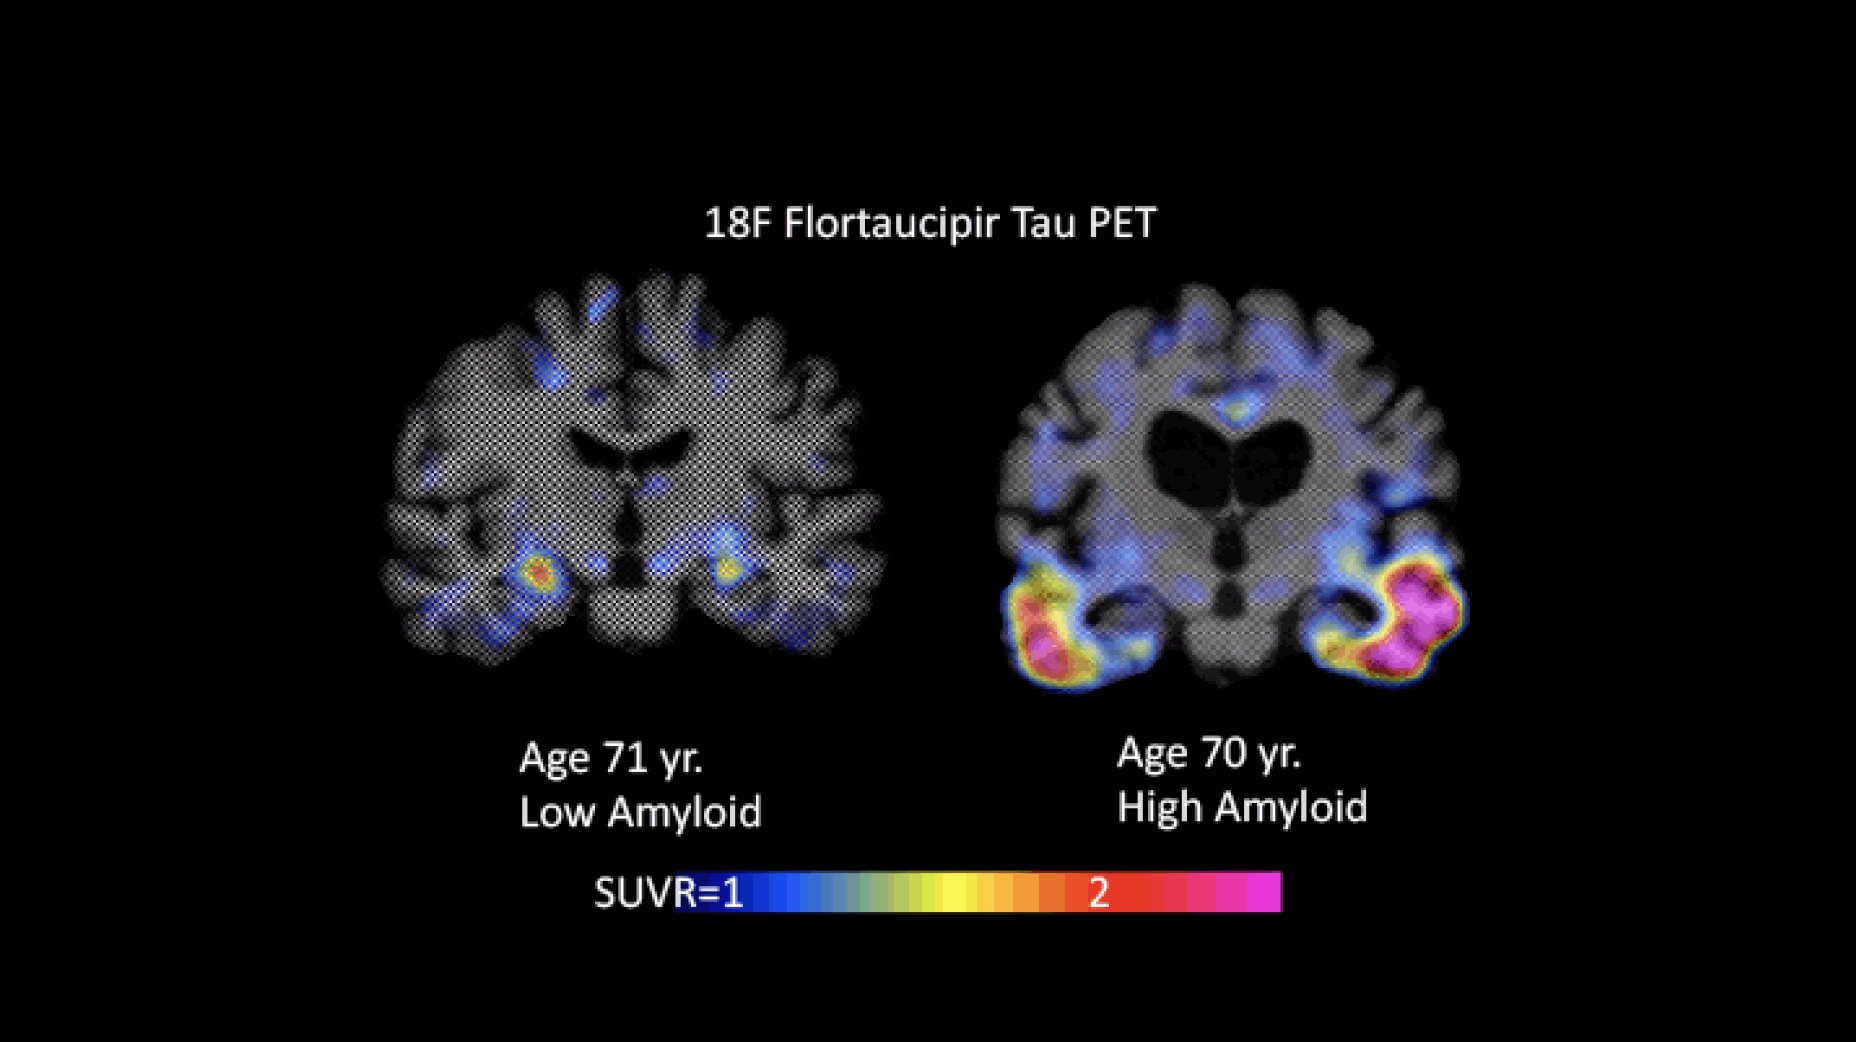 Figure 1. Flortaucipir images with low (Braak I/II) and high (Braak III/VI) levels of tau. The individual whose image is shown on the left had low amyloid levels; the one shown on the right had high amyloid levels (images courtesy of Keith Johnson) 